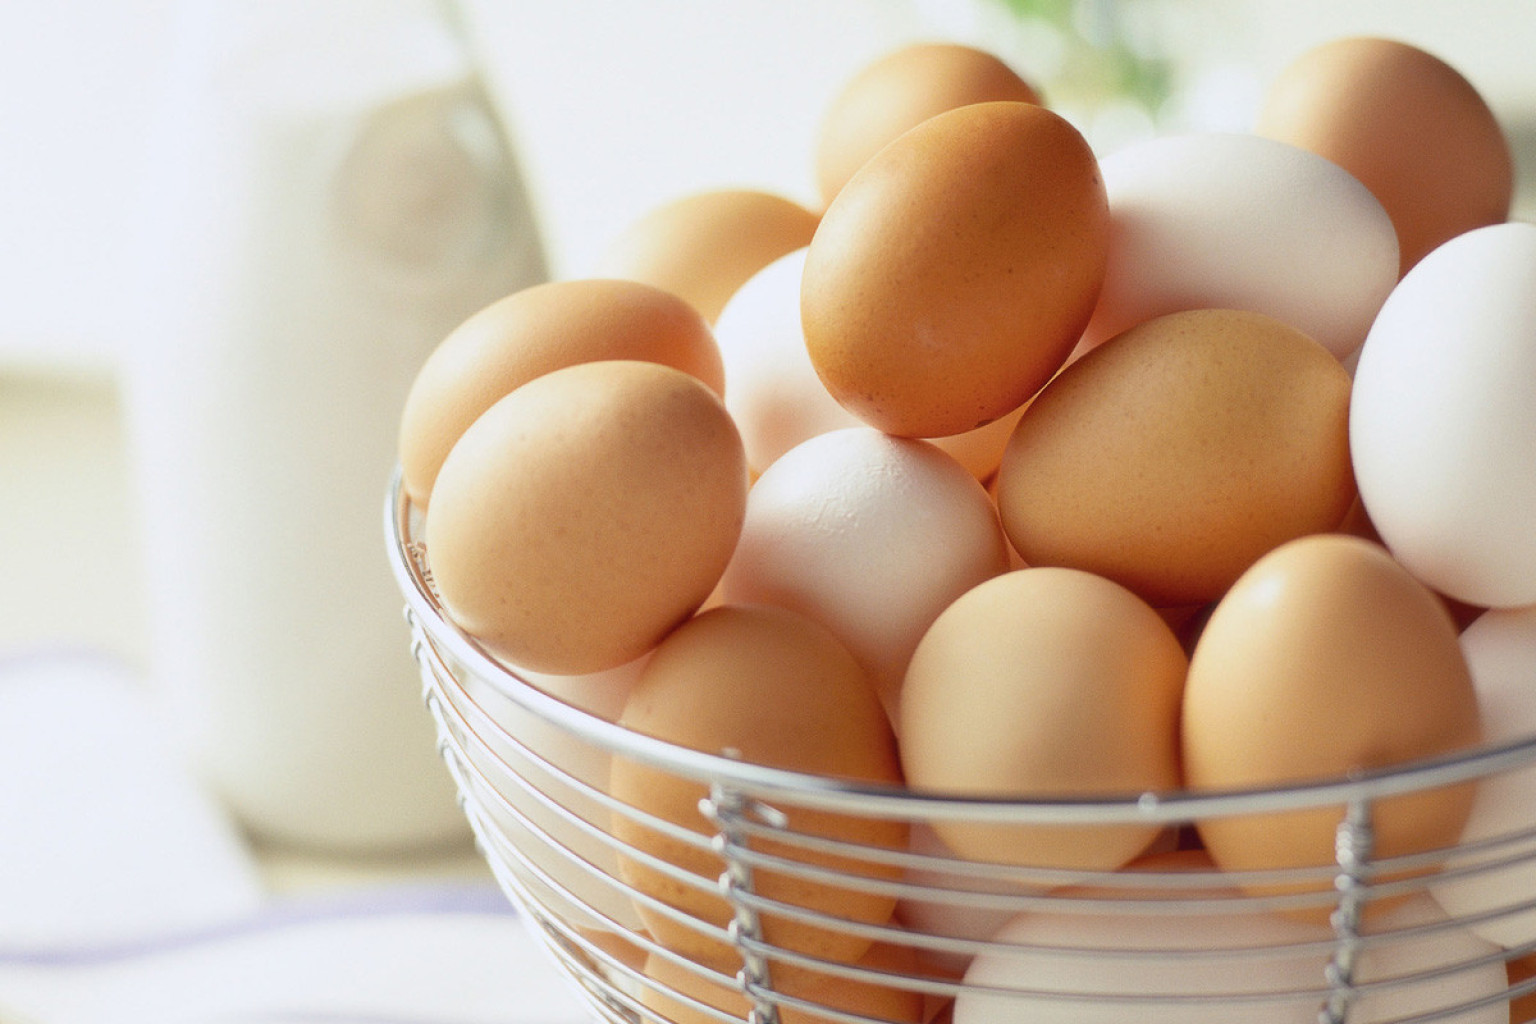 Sodexo has announced it will only source free-range eggs by 2025